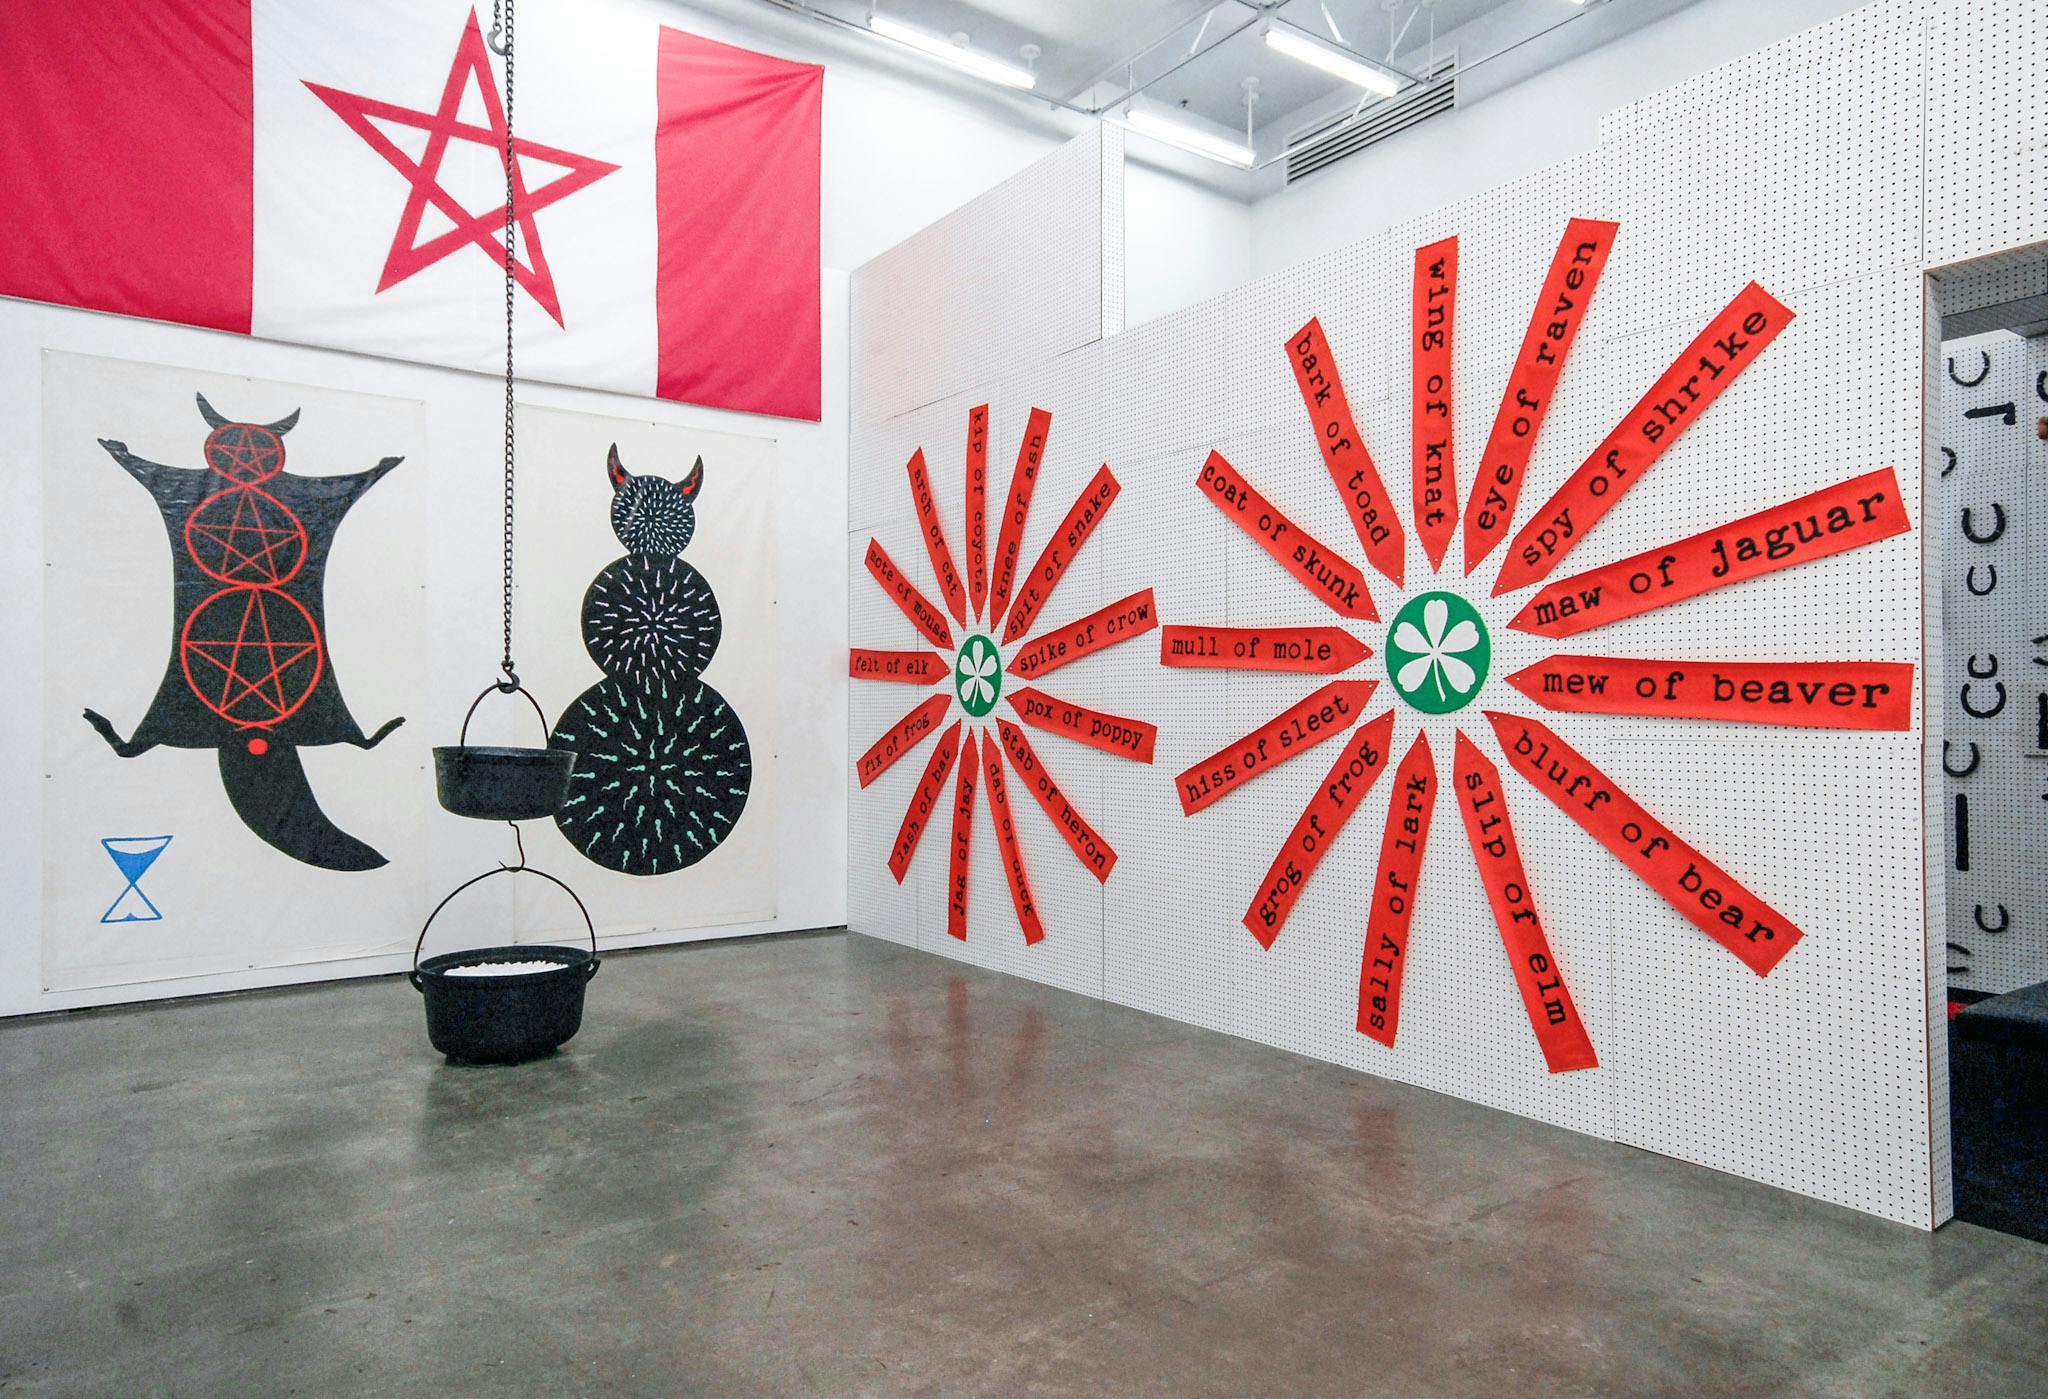 Flags, large posters, and handwritten signs cover the gallery walls. Red, black, and white are prominently used in those images. Two black cooking pots are hanging from the ceiling.